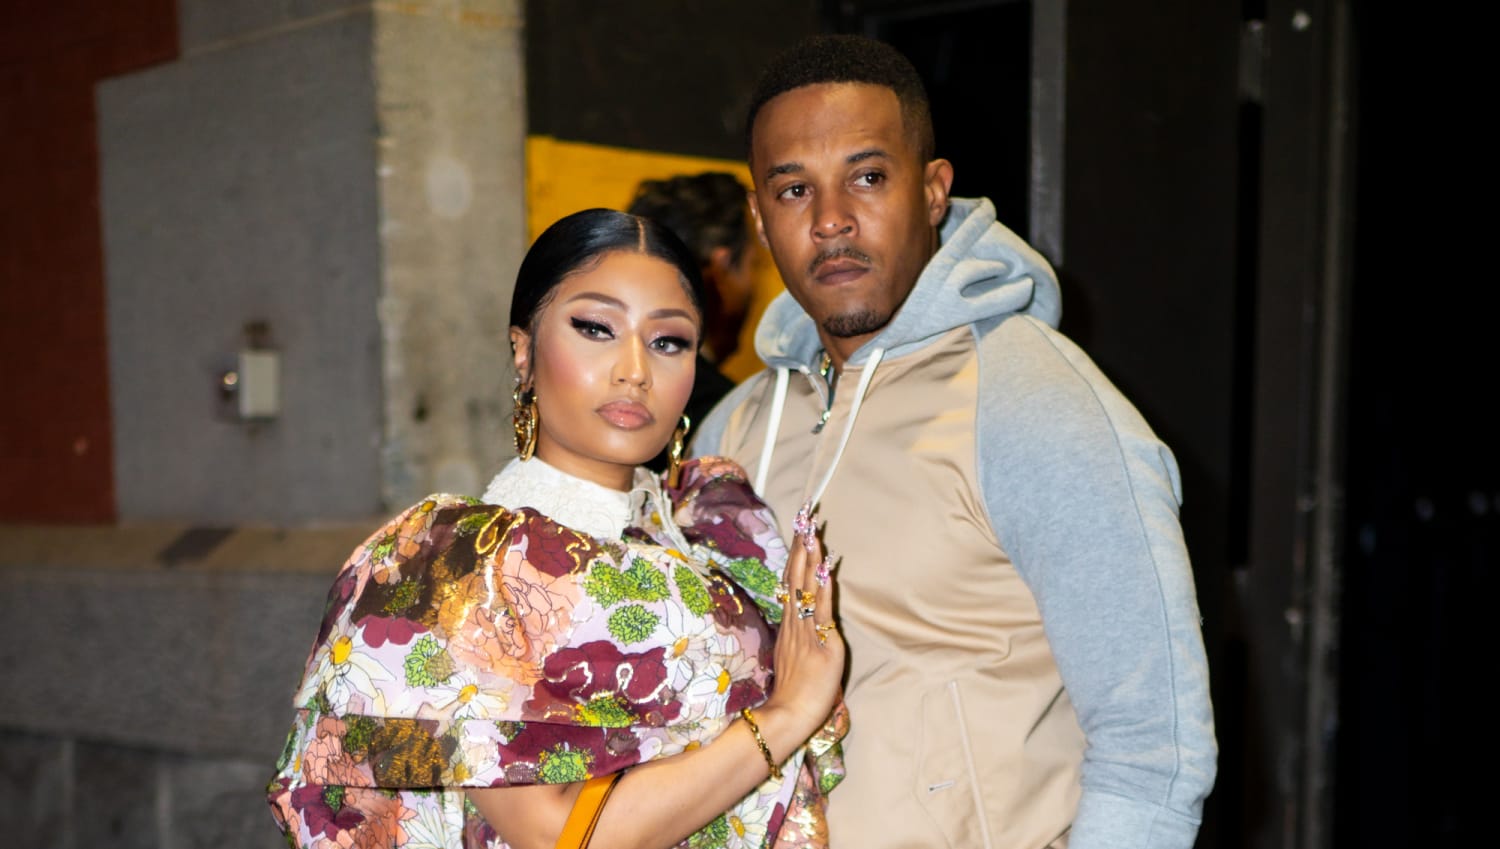 Nicki Minaj dropped from lawsuit accusing her of harassing husband’s sexual assault victim